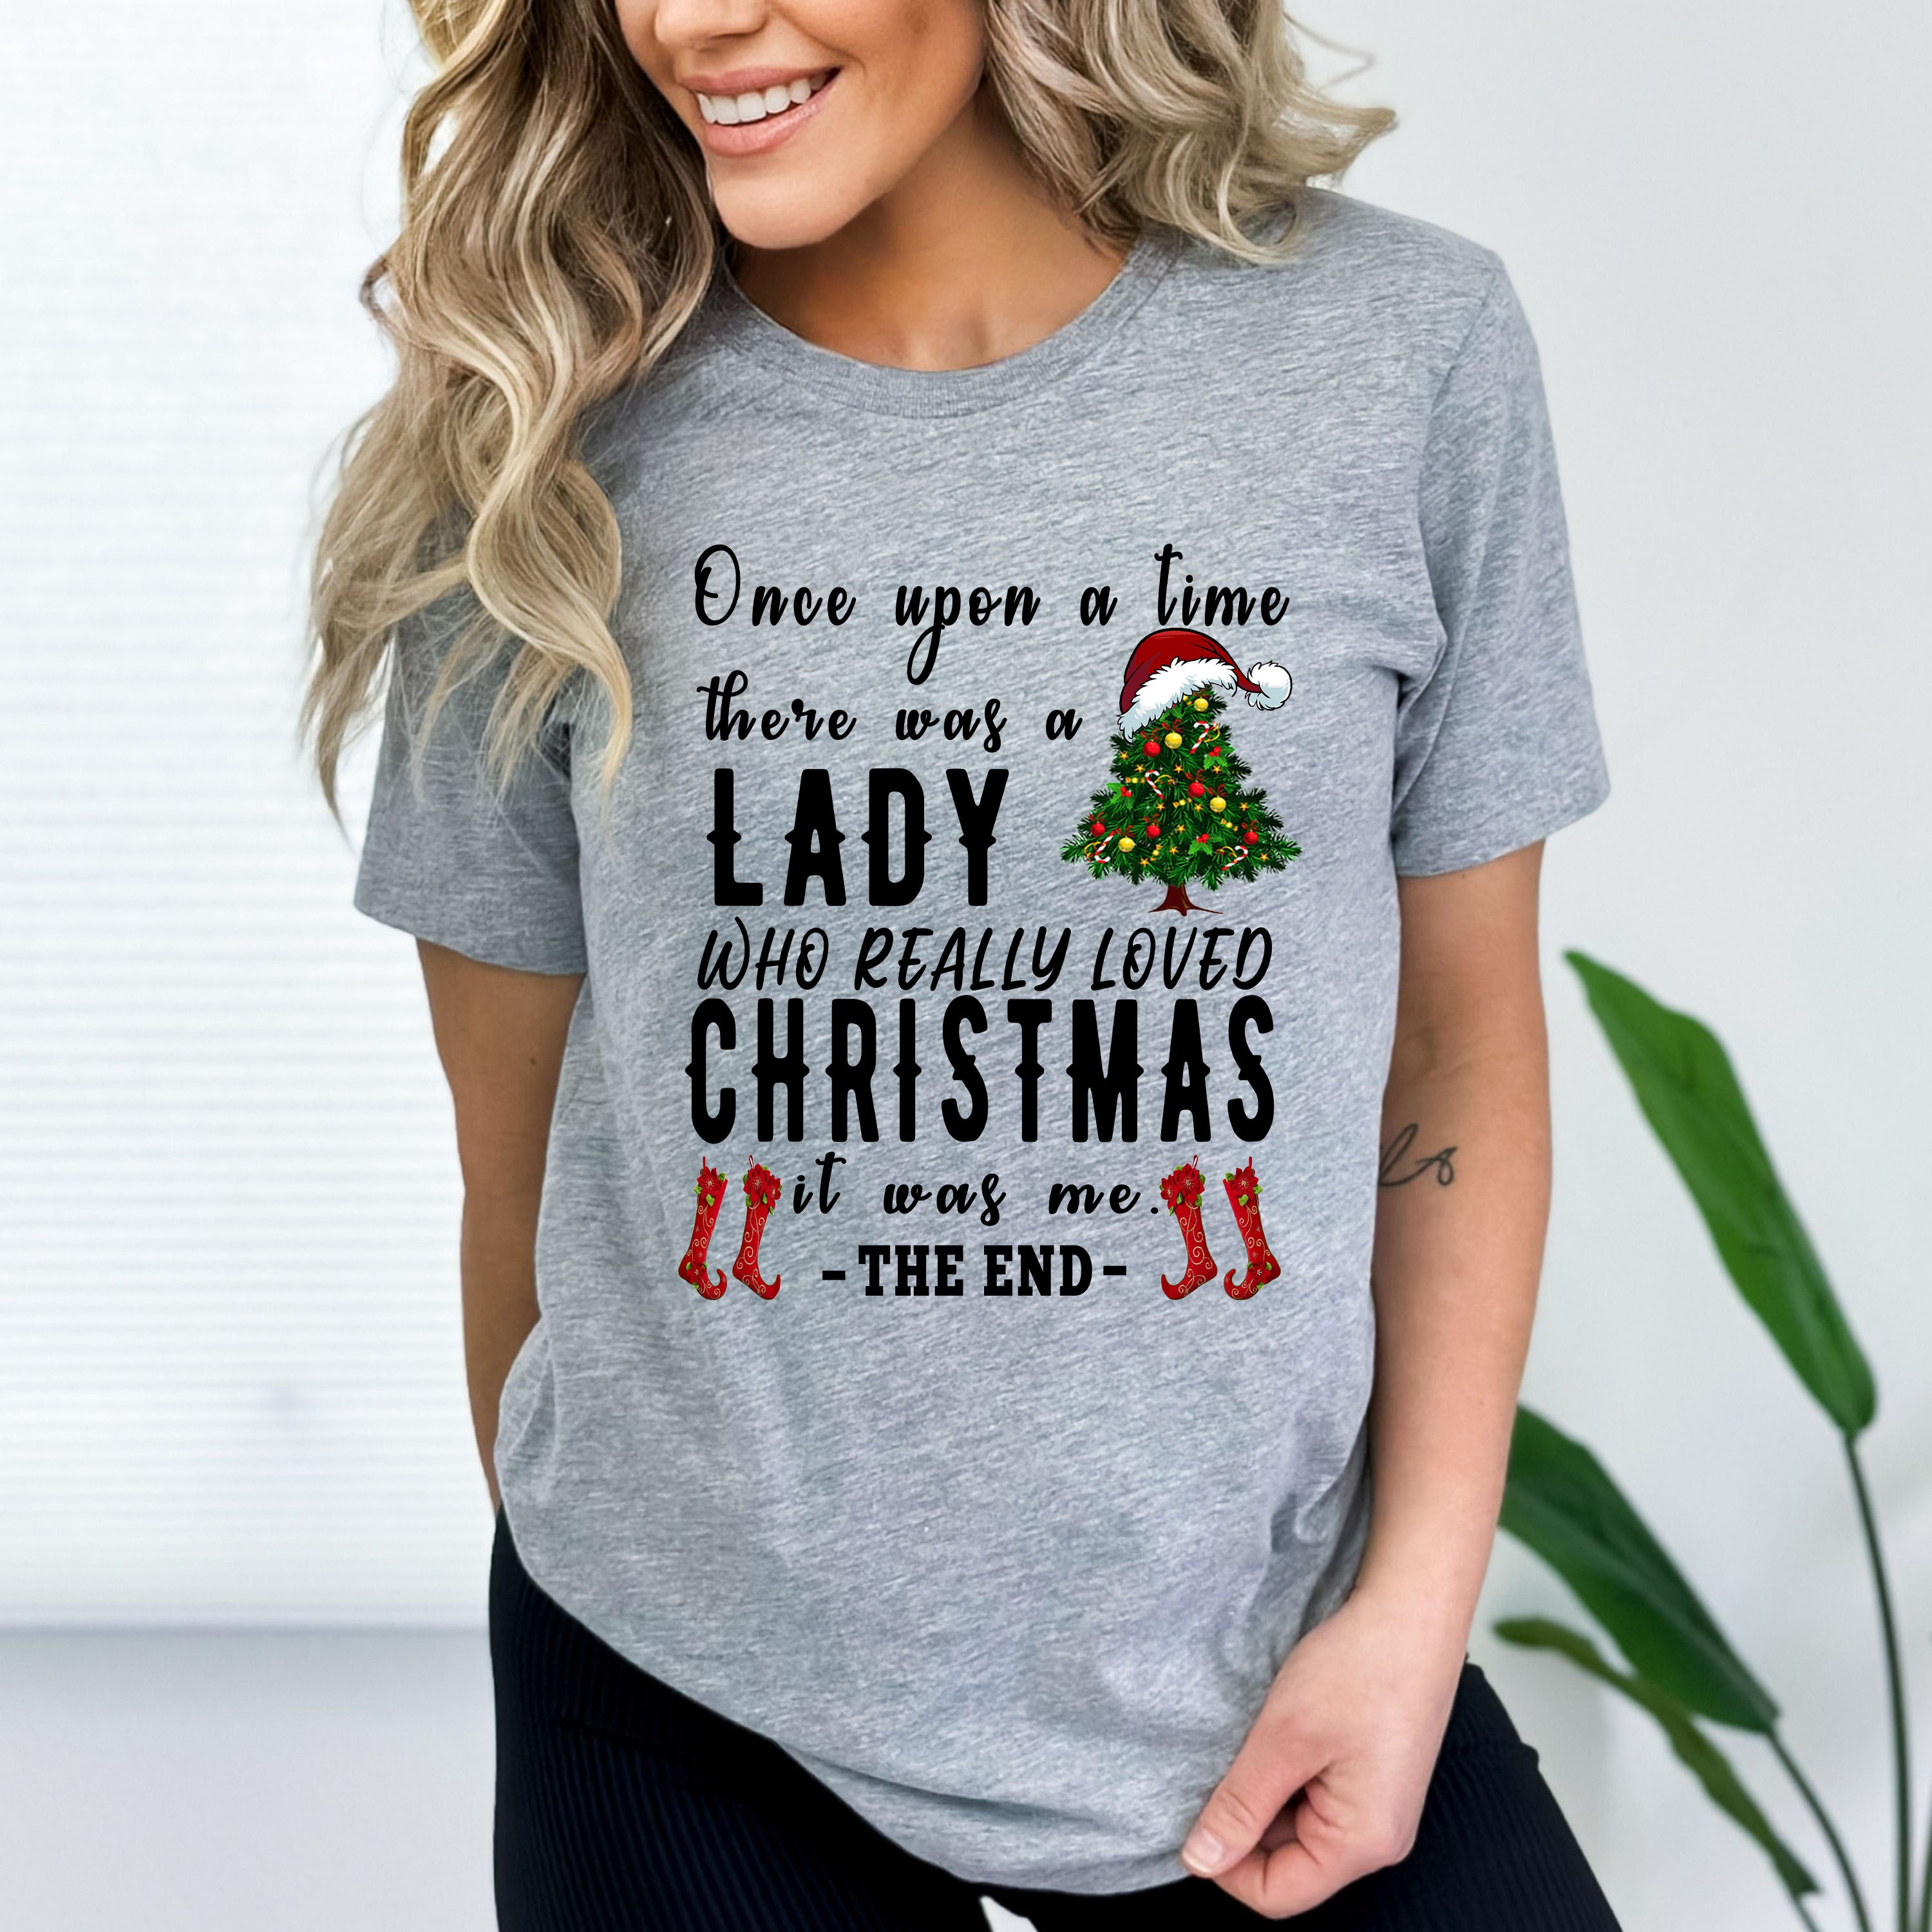 "A Lady Who Really Loved Christmas"